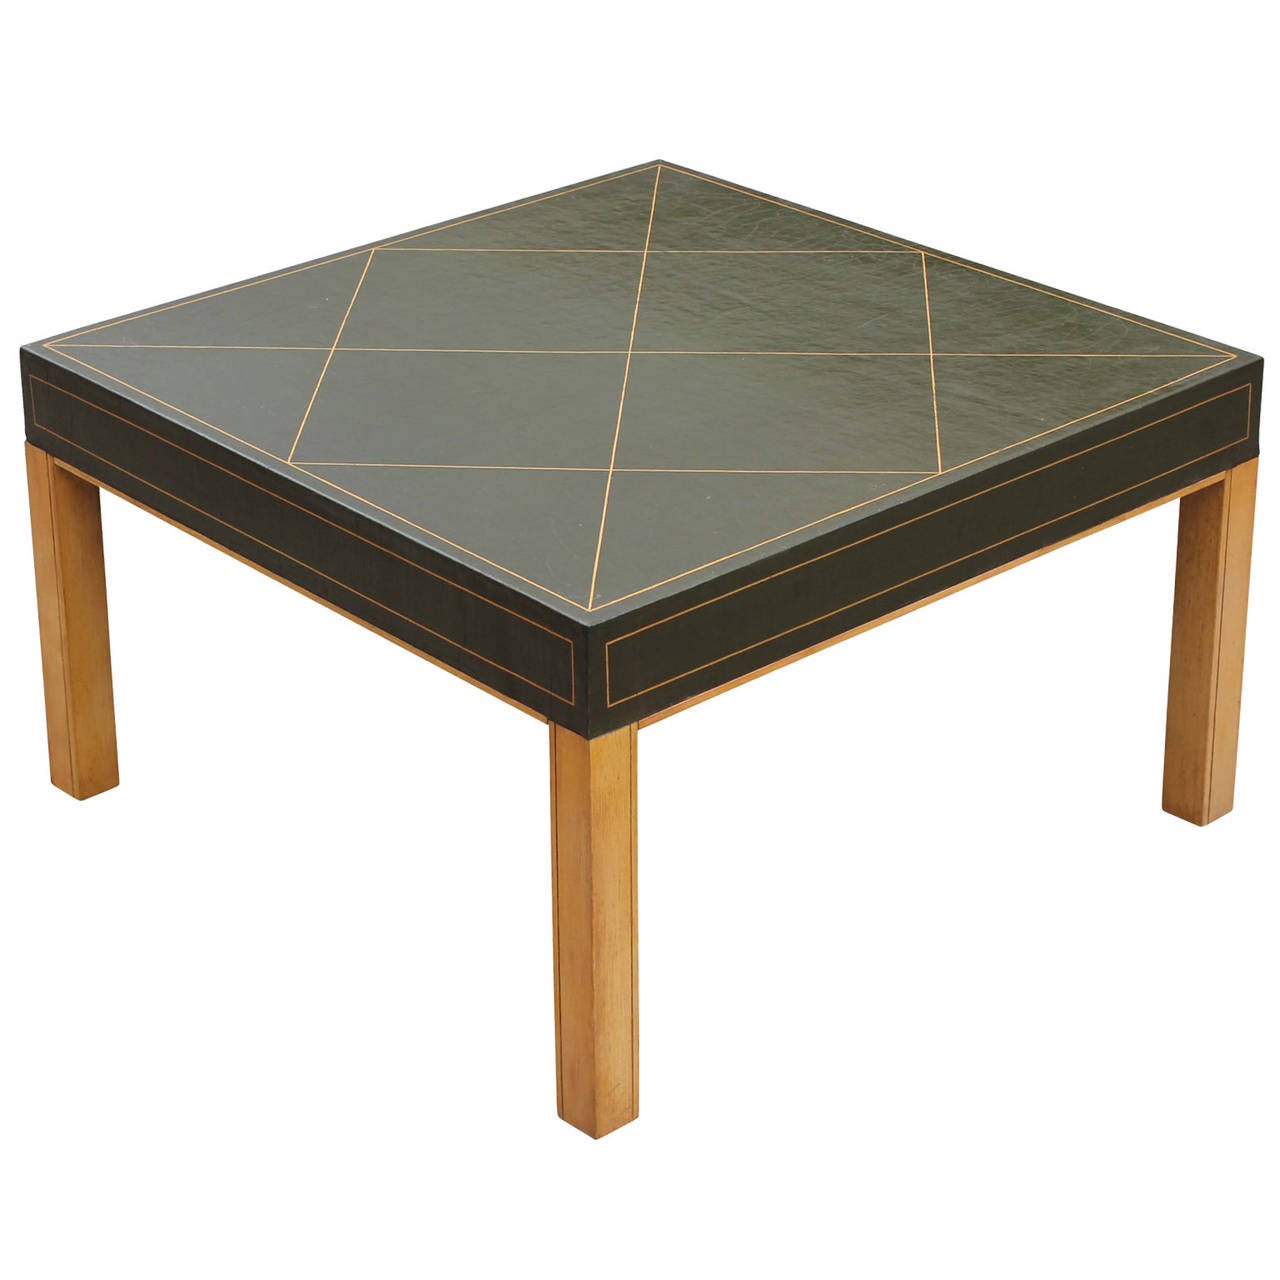 Gorgeous little Parzinger style coffee table. Tabletop is beautifully aged and crackled bottle green leather with gold accents. Base is a gold toned maple. Legs are very simple and clean lined.